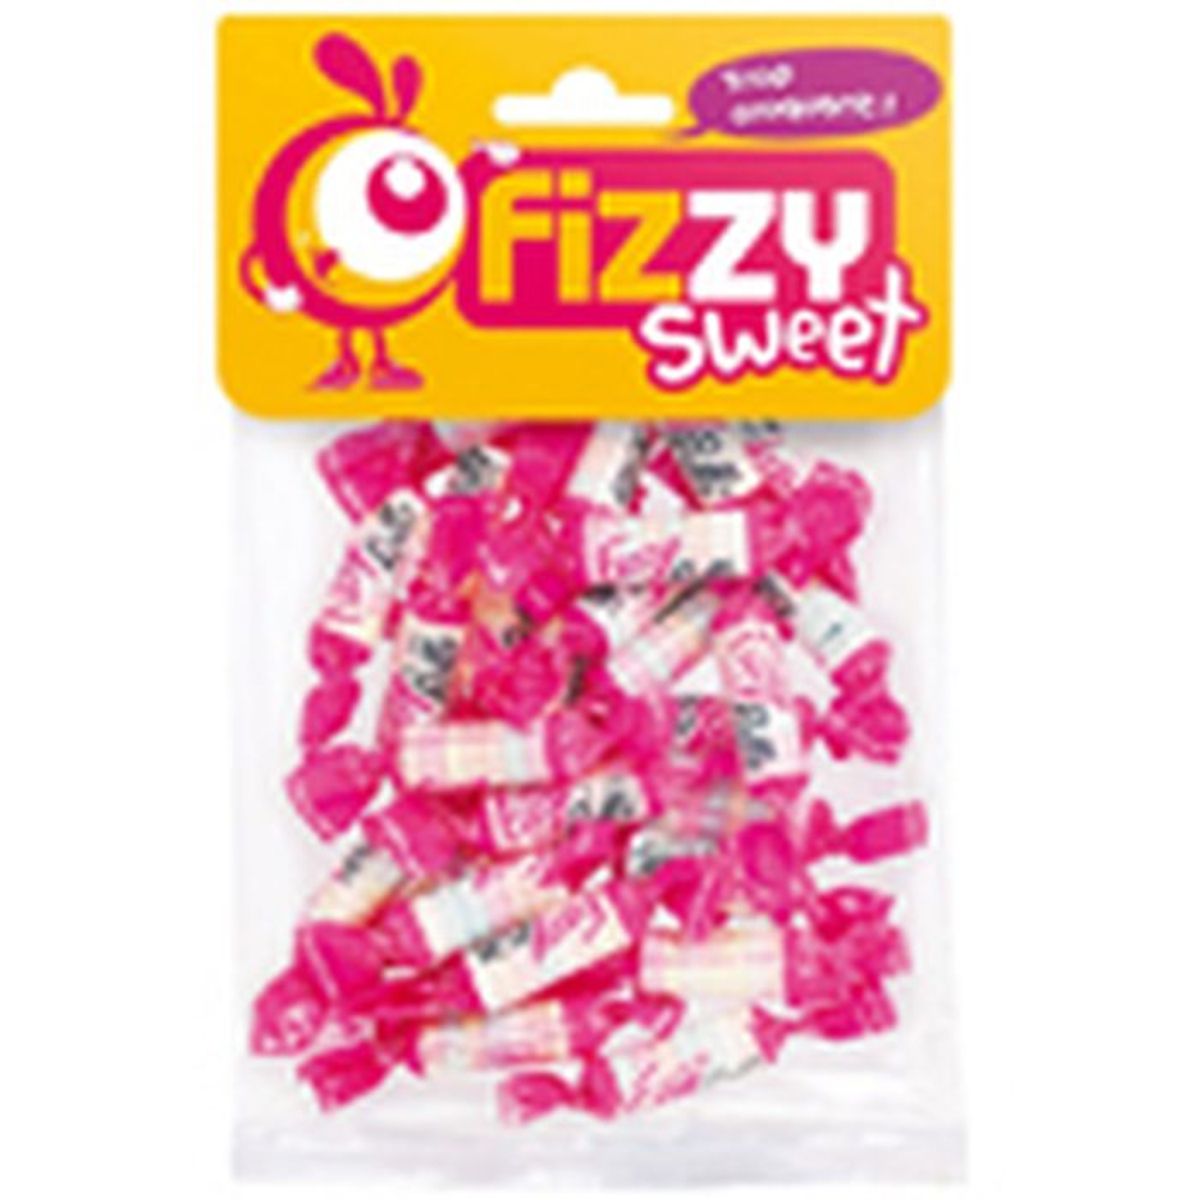 FIZZY Sweet collier montre candy 110G pas cher 